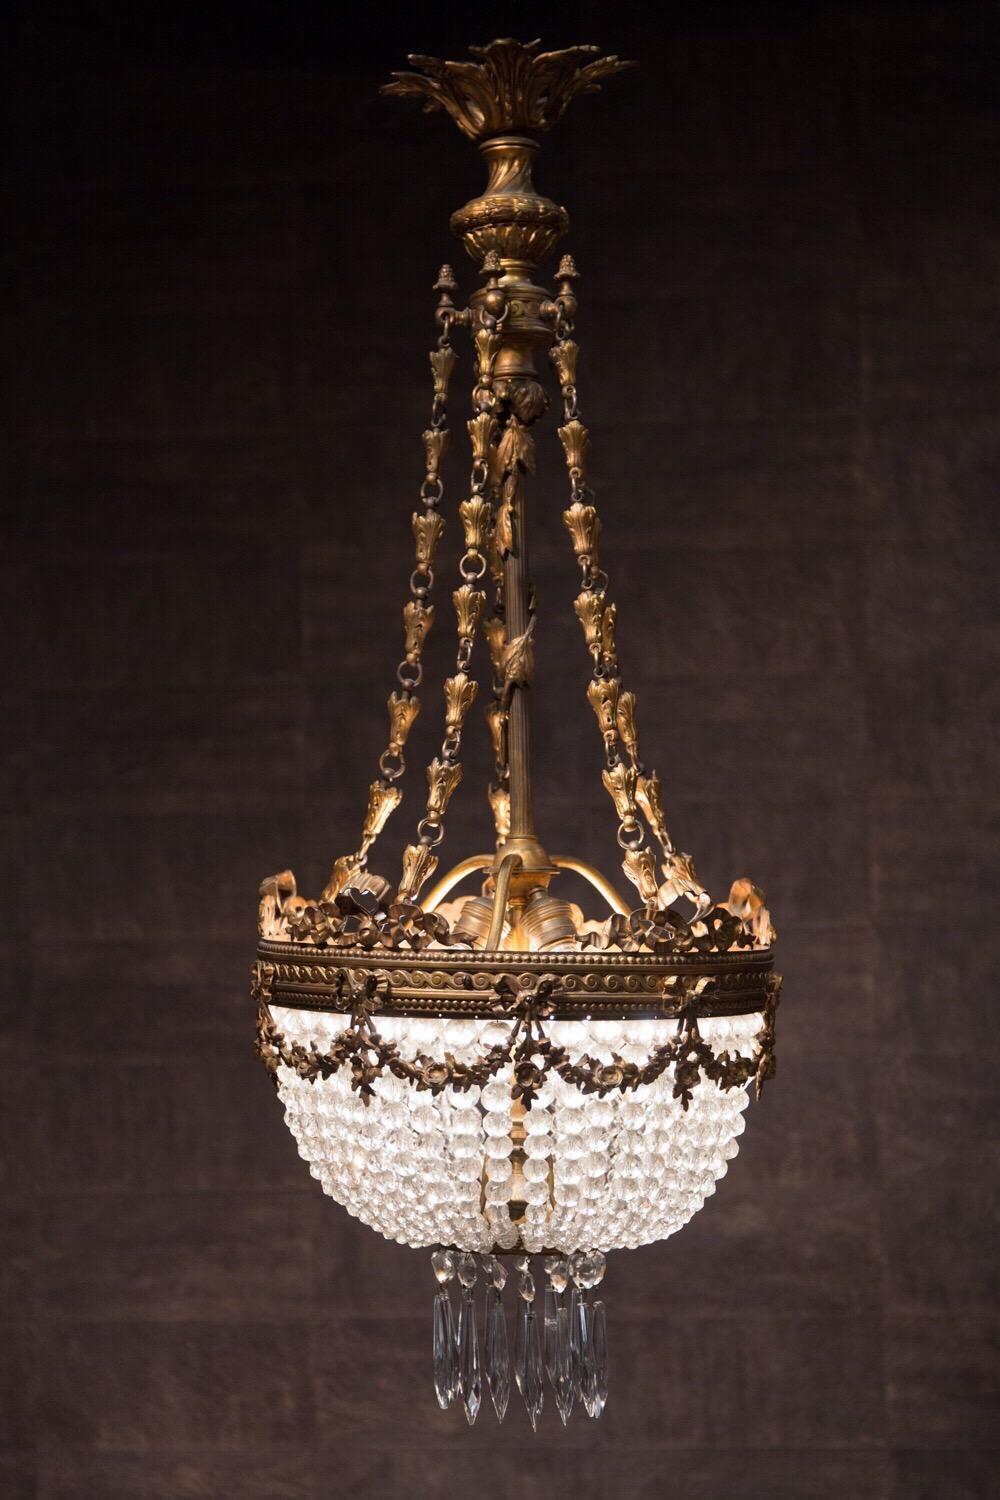 Late 19th century French gilt bronze and cut-crystal basket chandelier, hang with many chains of crystal drops, with a central ring terminating in cut-glass font and gilt bronze finial.
This chandelier is a refined and charming statement in